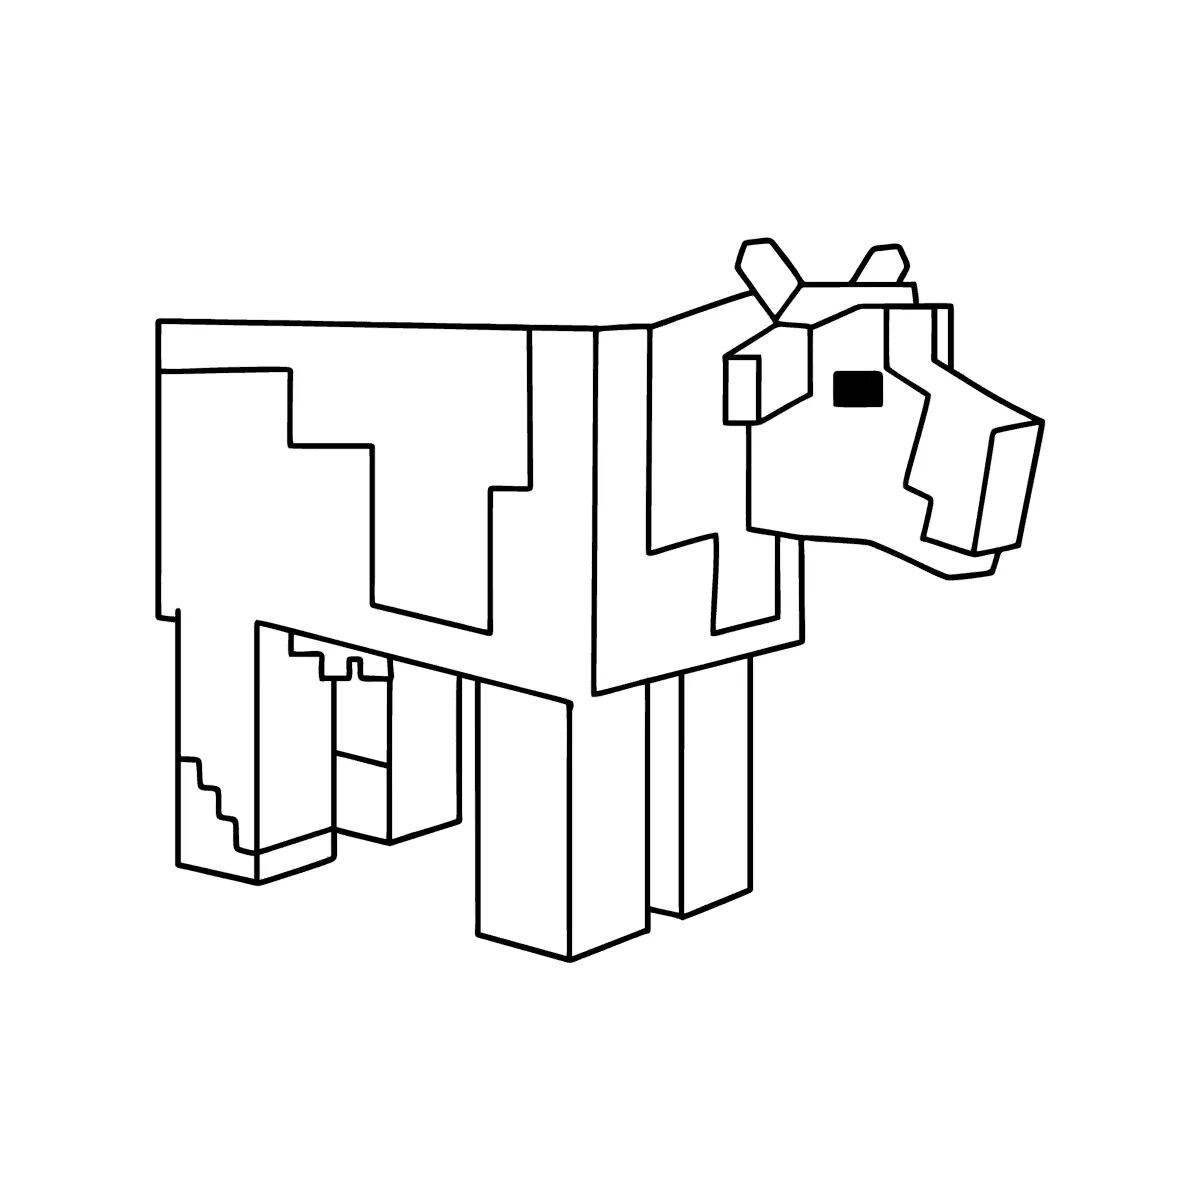 Gorgeous minecraft dog coloring page